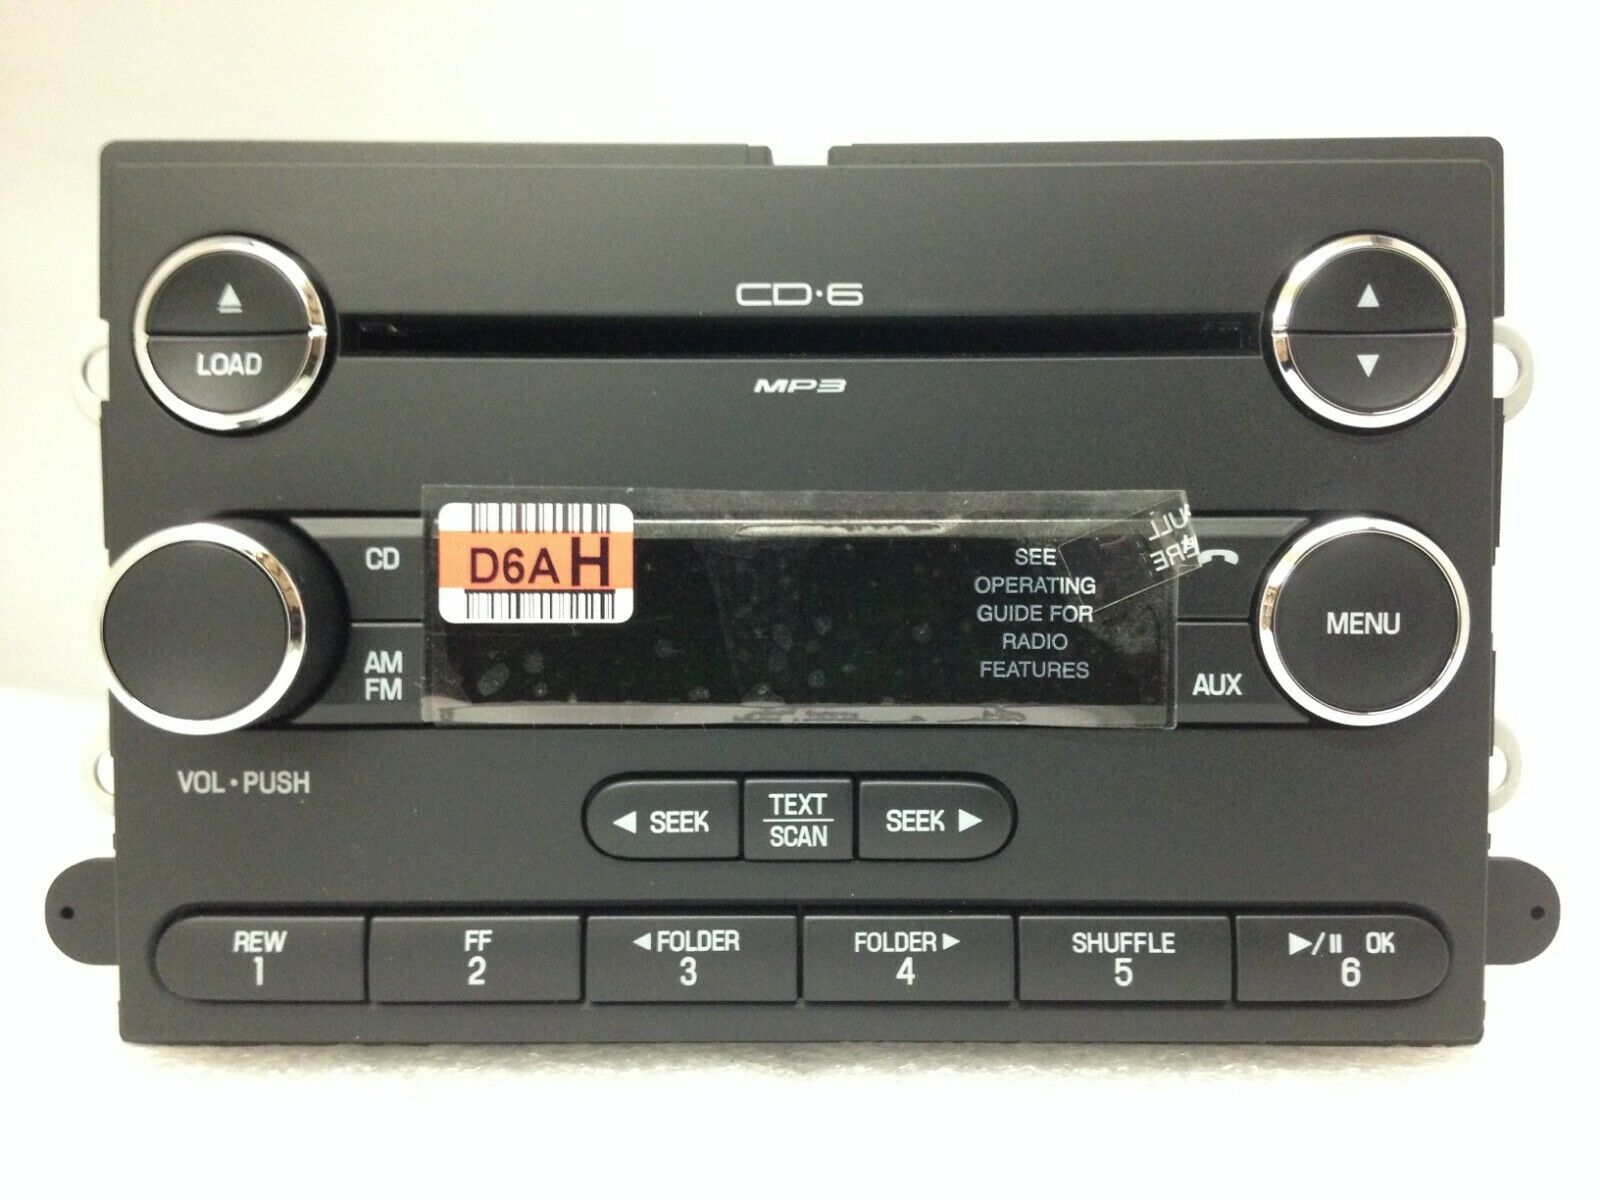 Ford Mercury CD6 MP3 radio face +buttons (07+ Delco chrome style